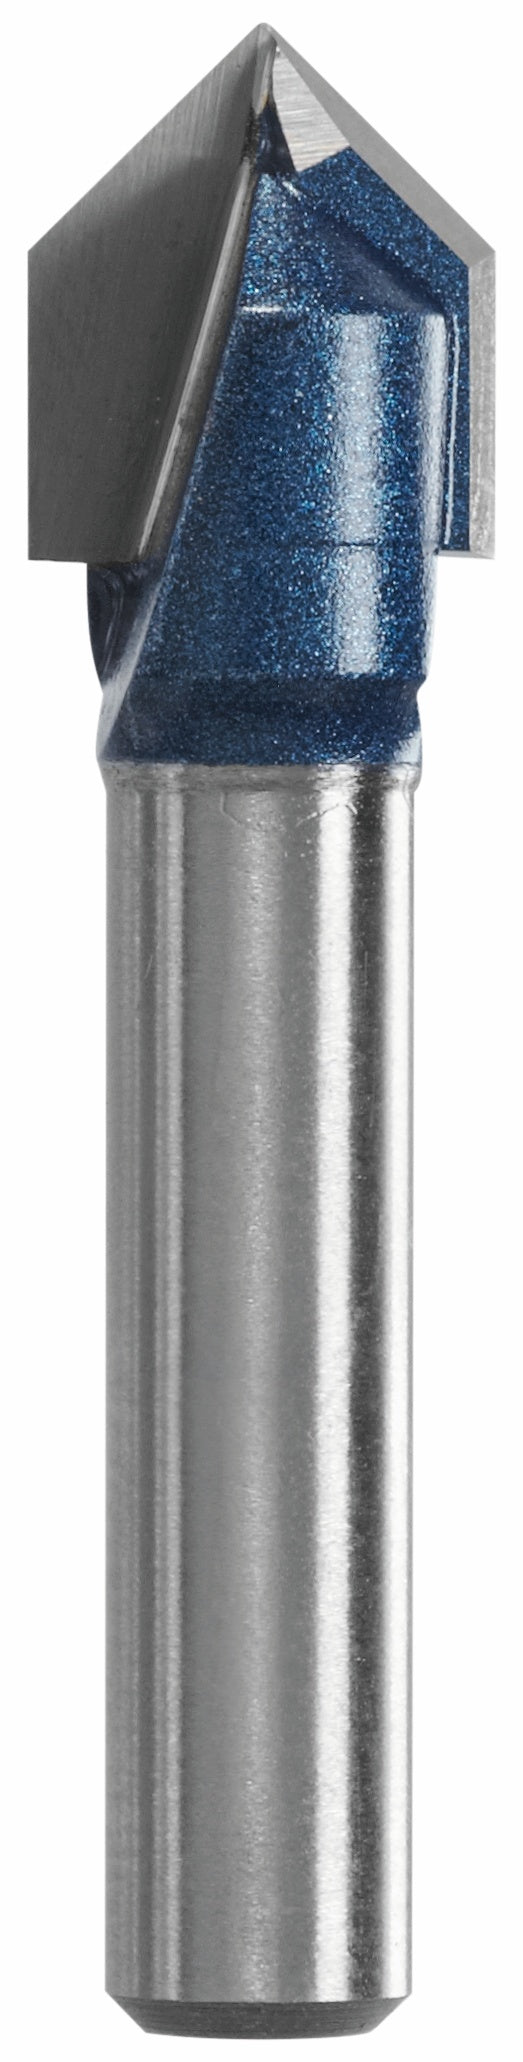 BOSCH 3/8" x 7/16" Carbide-Tipped V-Groove Router Bit